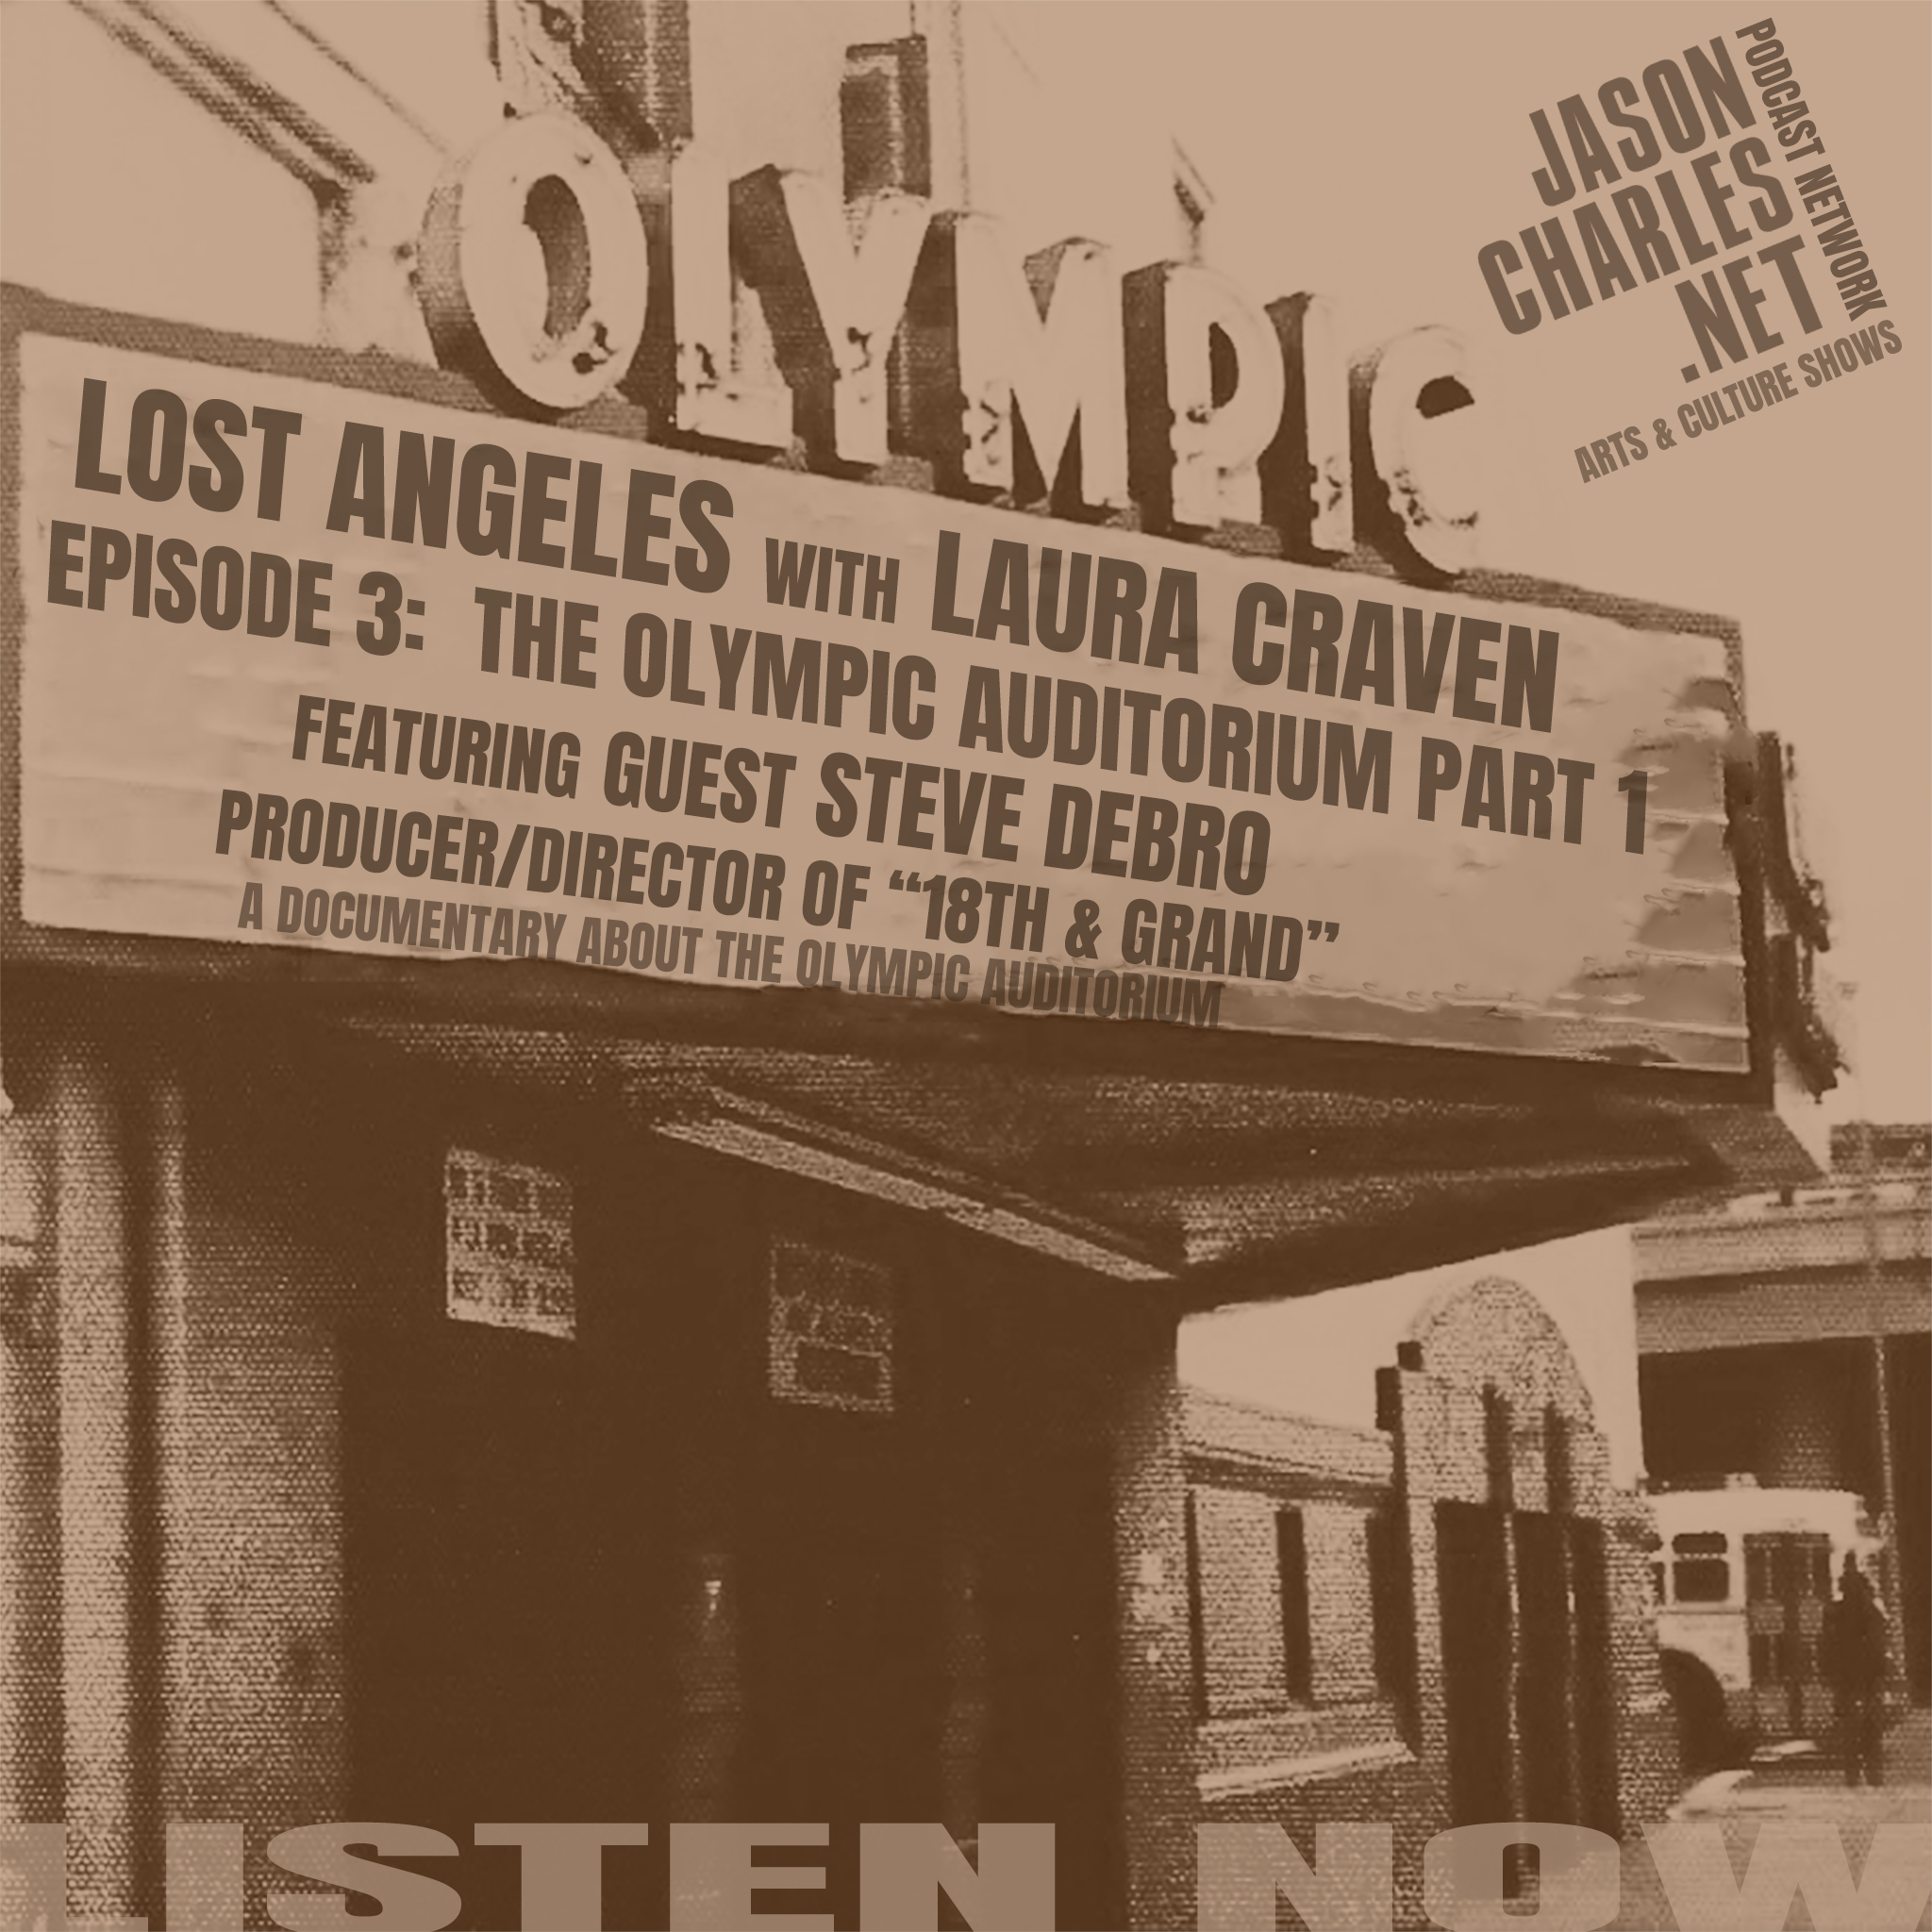 LOST ANGELES Episode 3 The Olympic Auditorium Part One